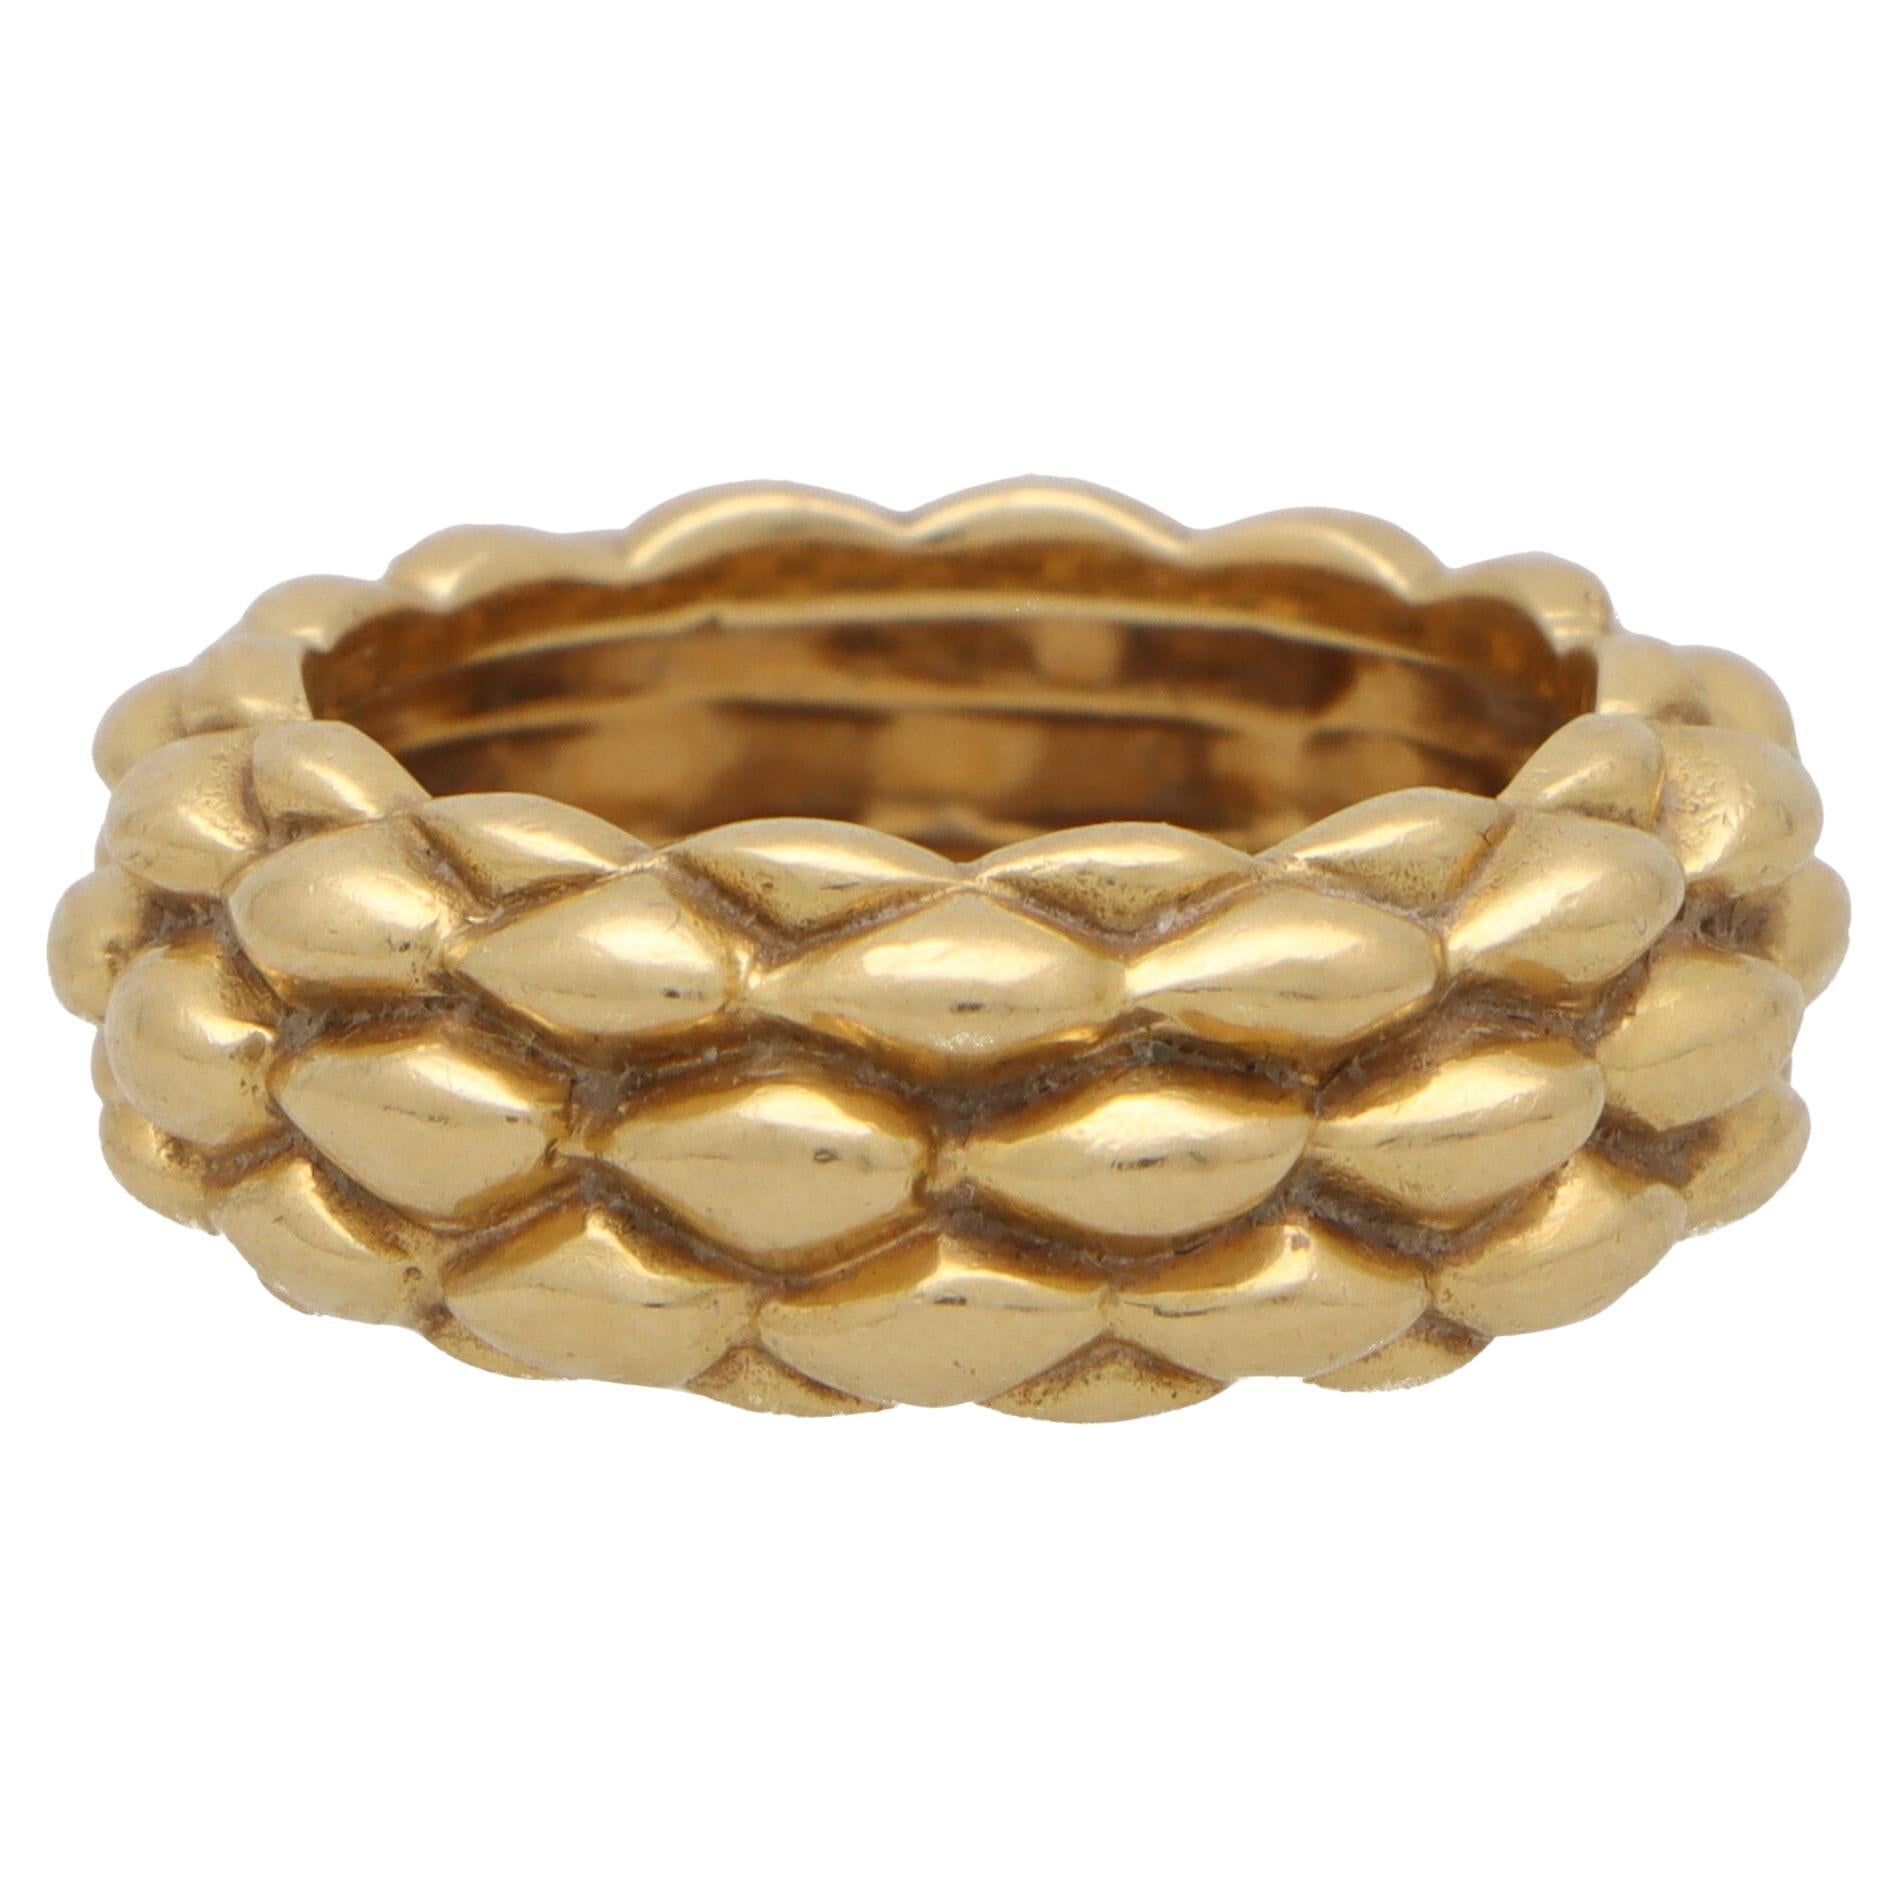 Vintage Chaumet 'Oat' Band Ring Set in 18k Yellow Gold